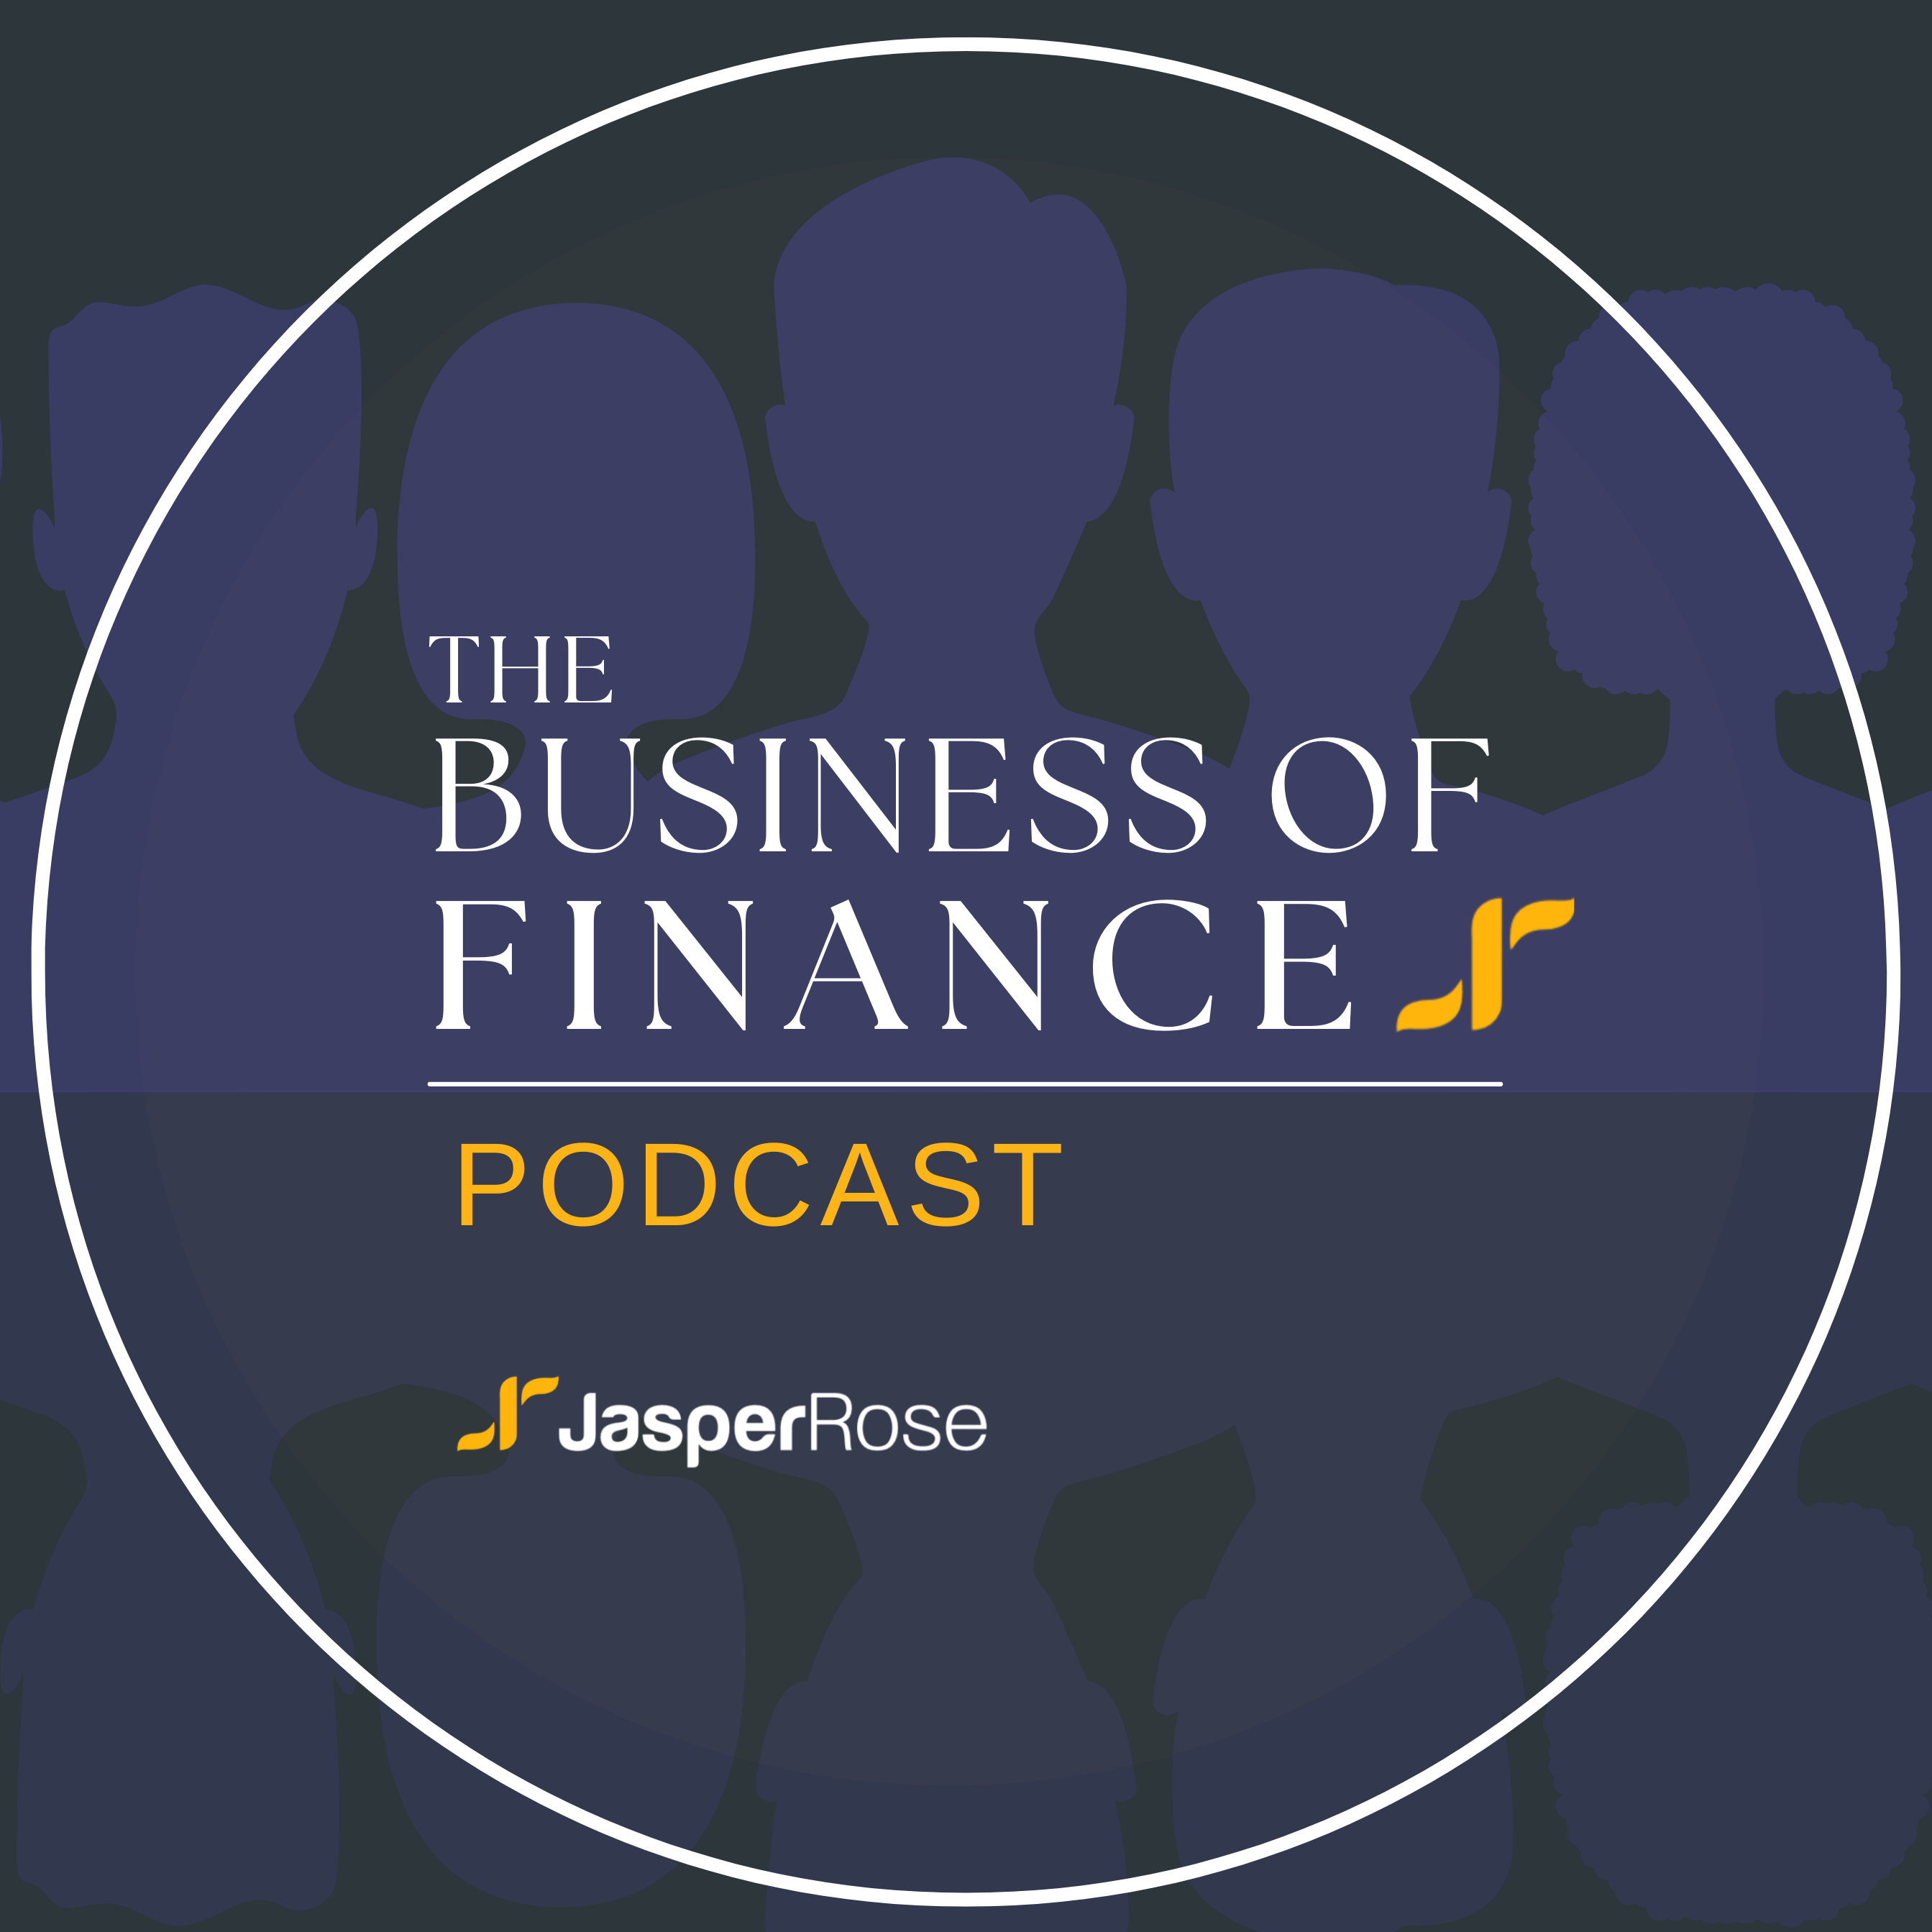 The Business of Finance Podcast